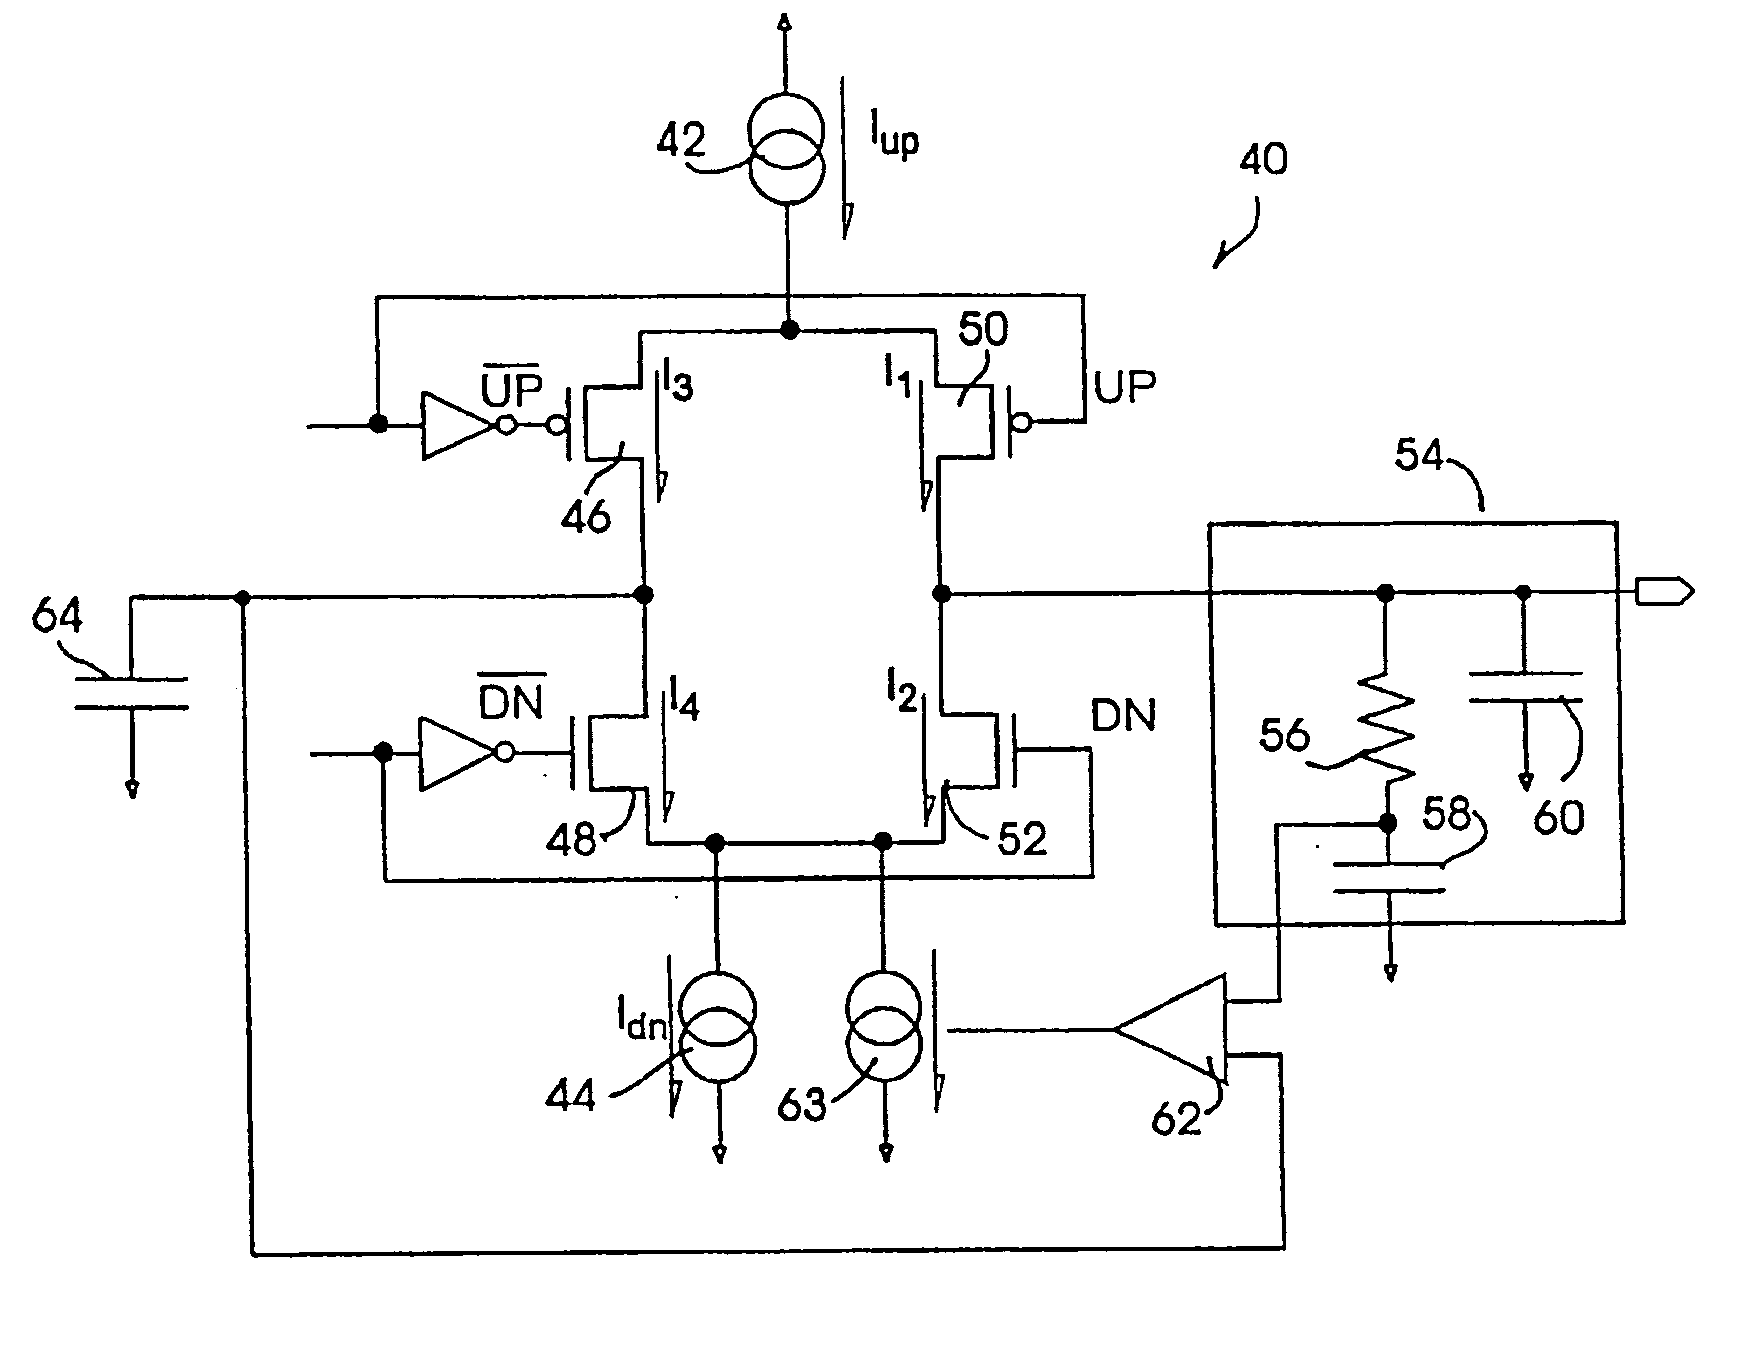 Low offset and low glitch energy charge pump and method of operating same